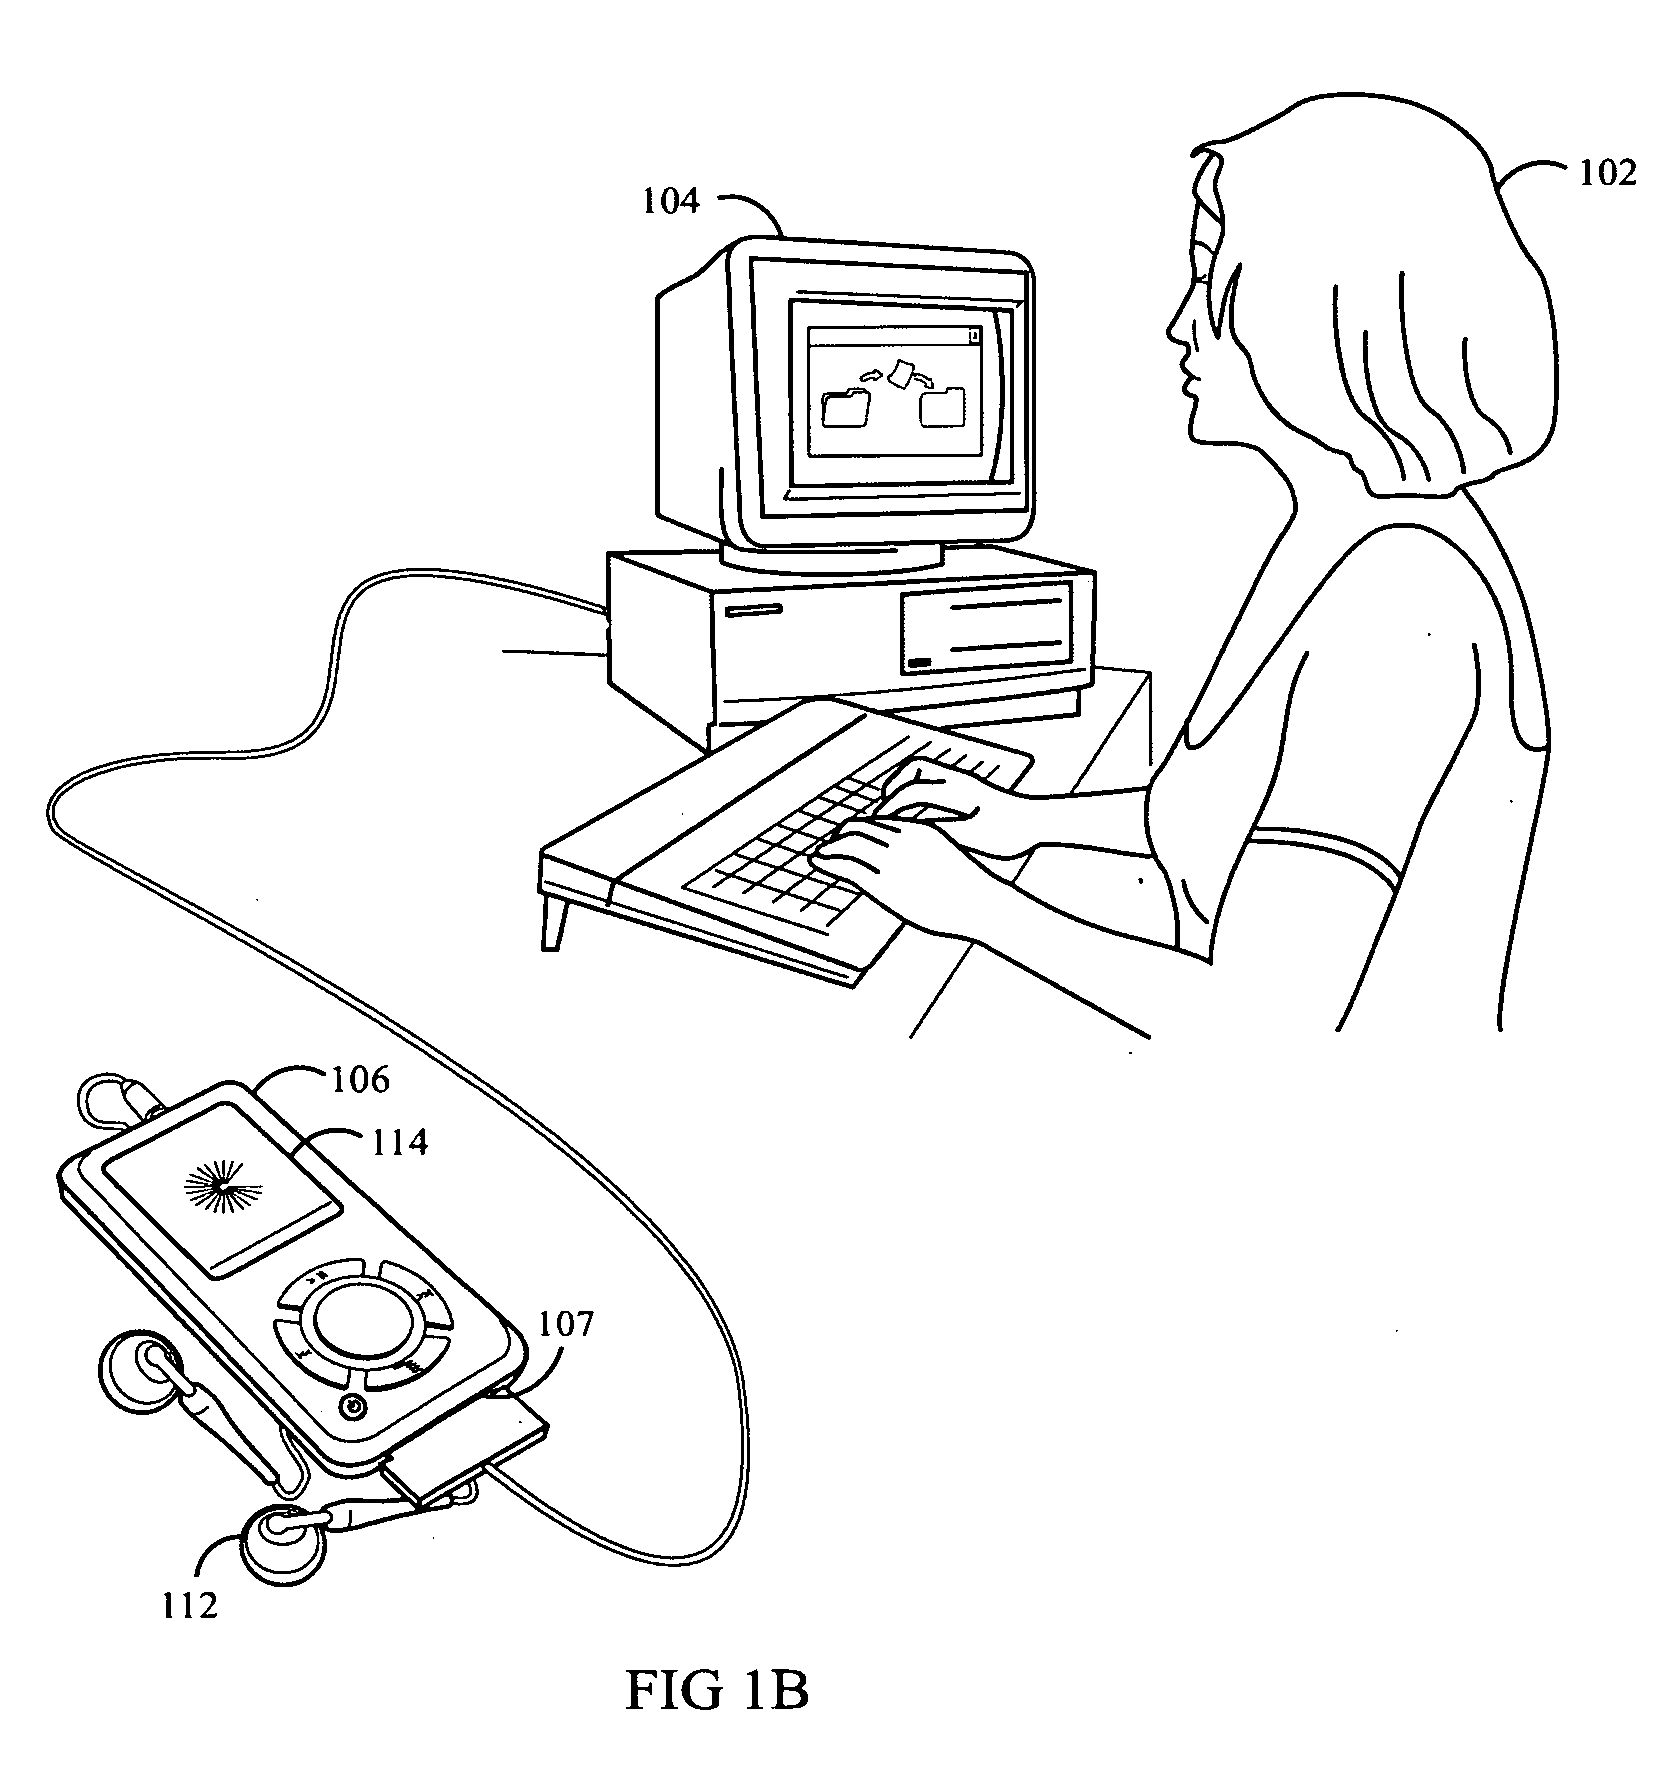 Device for Optimized Exercise Training of a Diabetic